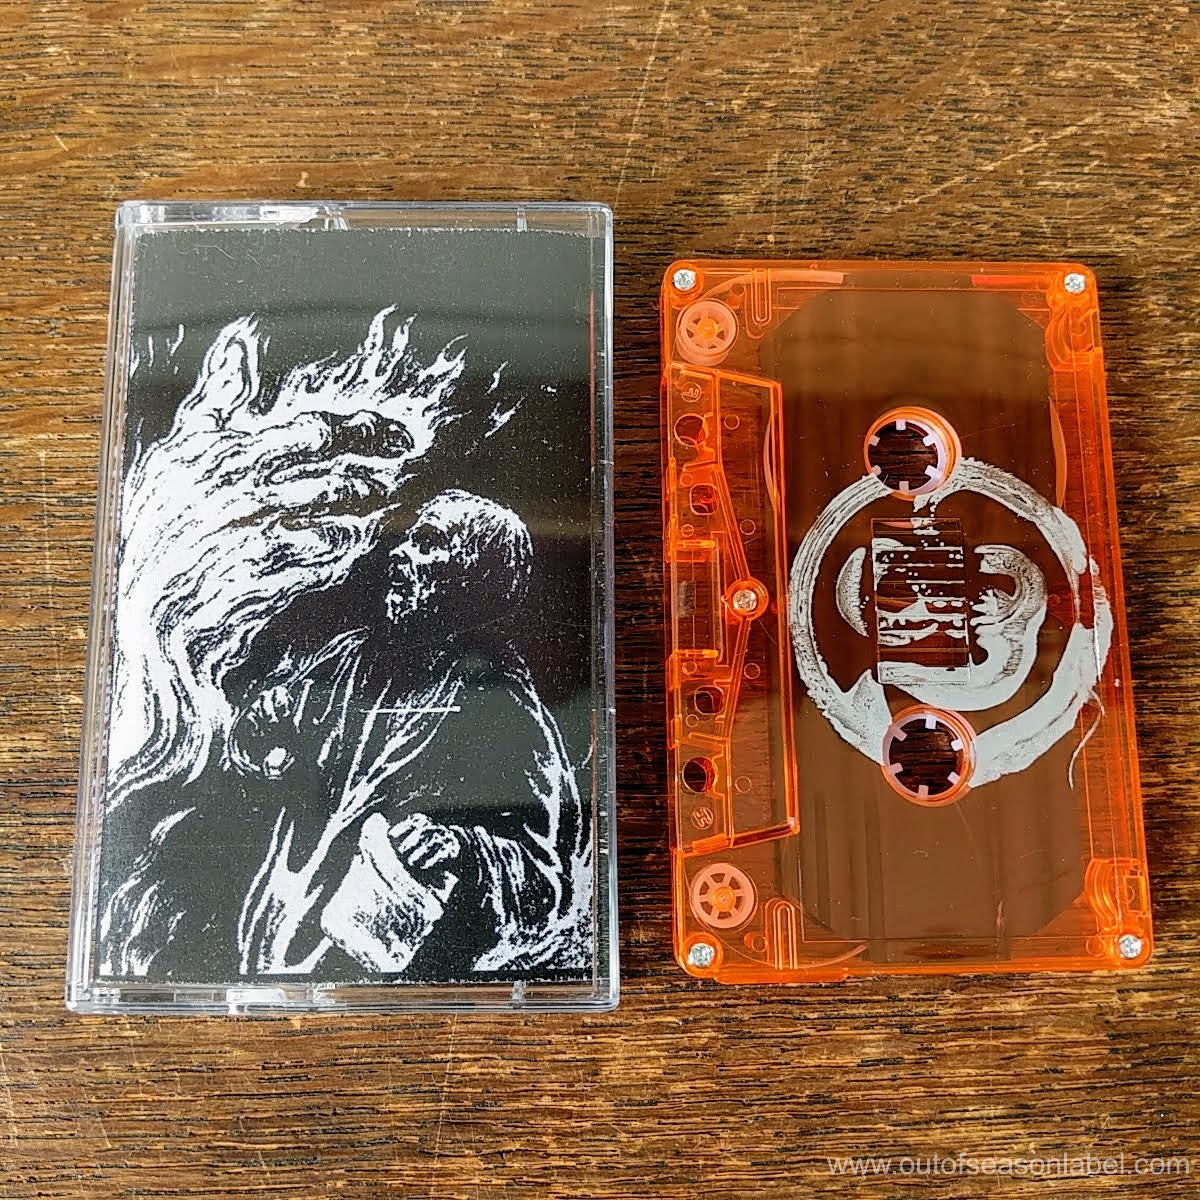 [SOLD OUT] VORVADOSS / MAGIC FIND "Starlit Dominions" Cassette Tape